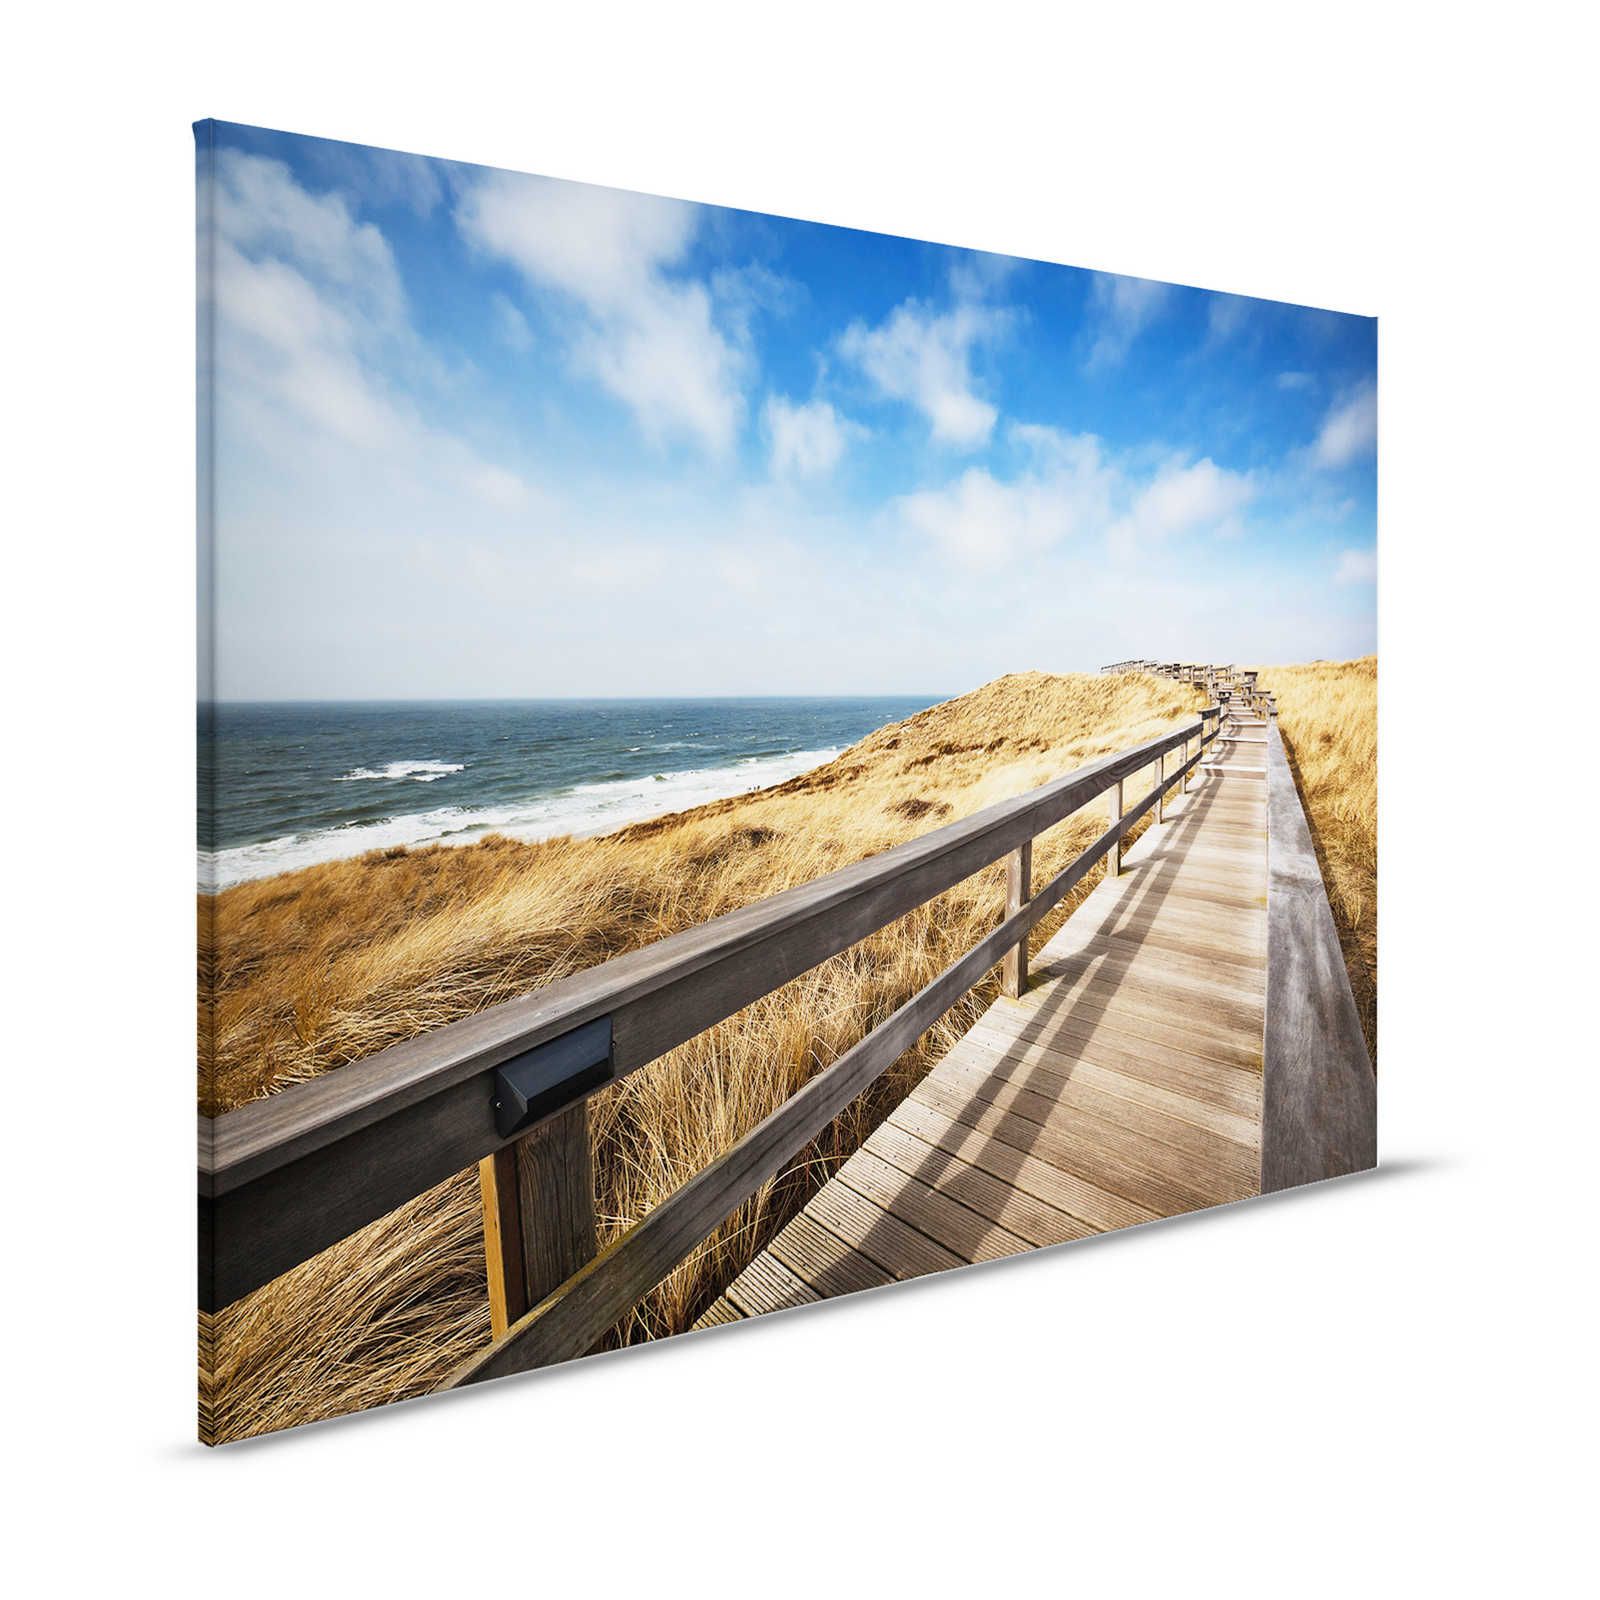 Dunes Canvas Painting with Footbridge by the Sea - 1.20 m x 0.80 m
